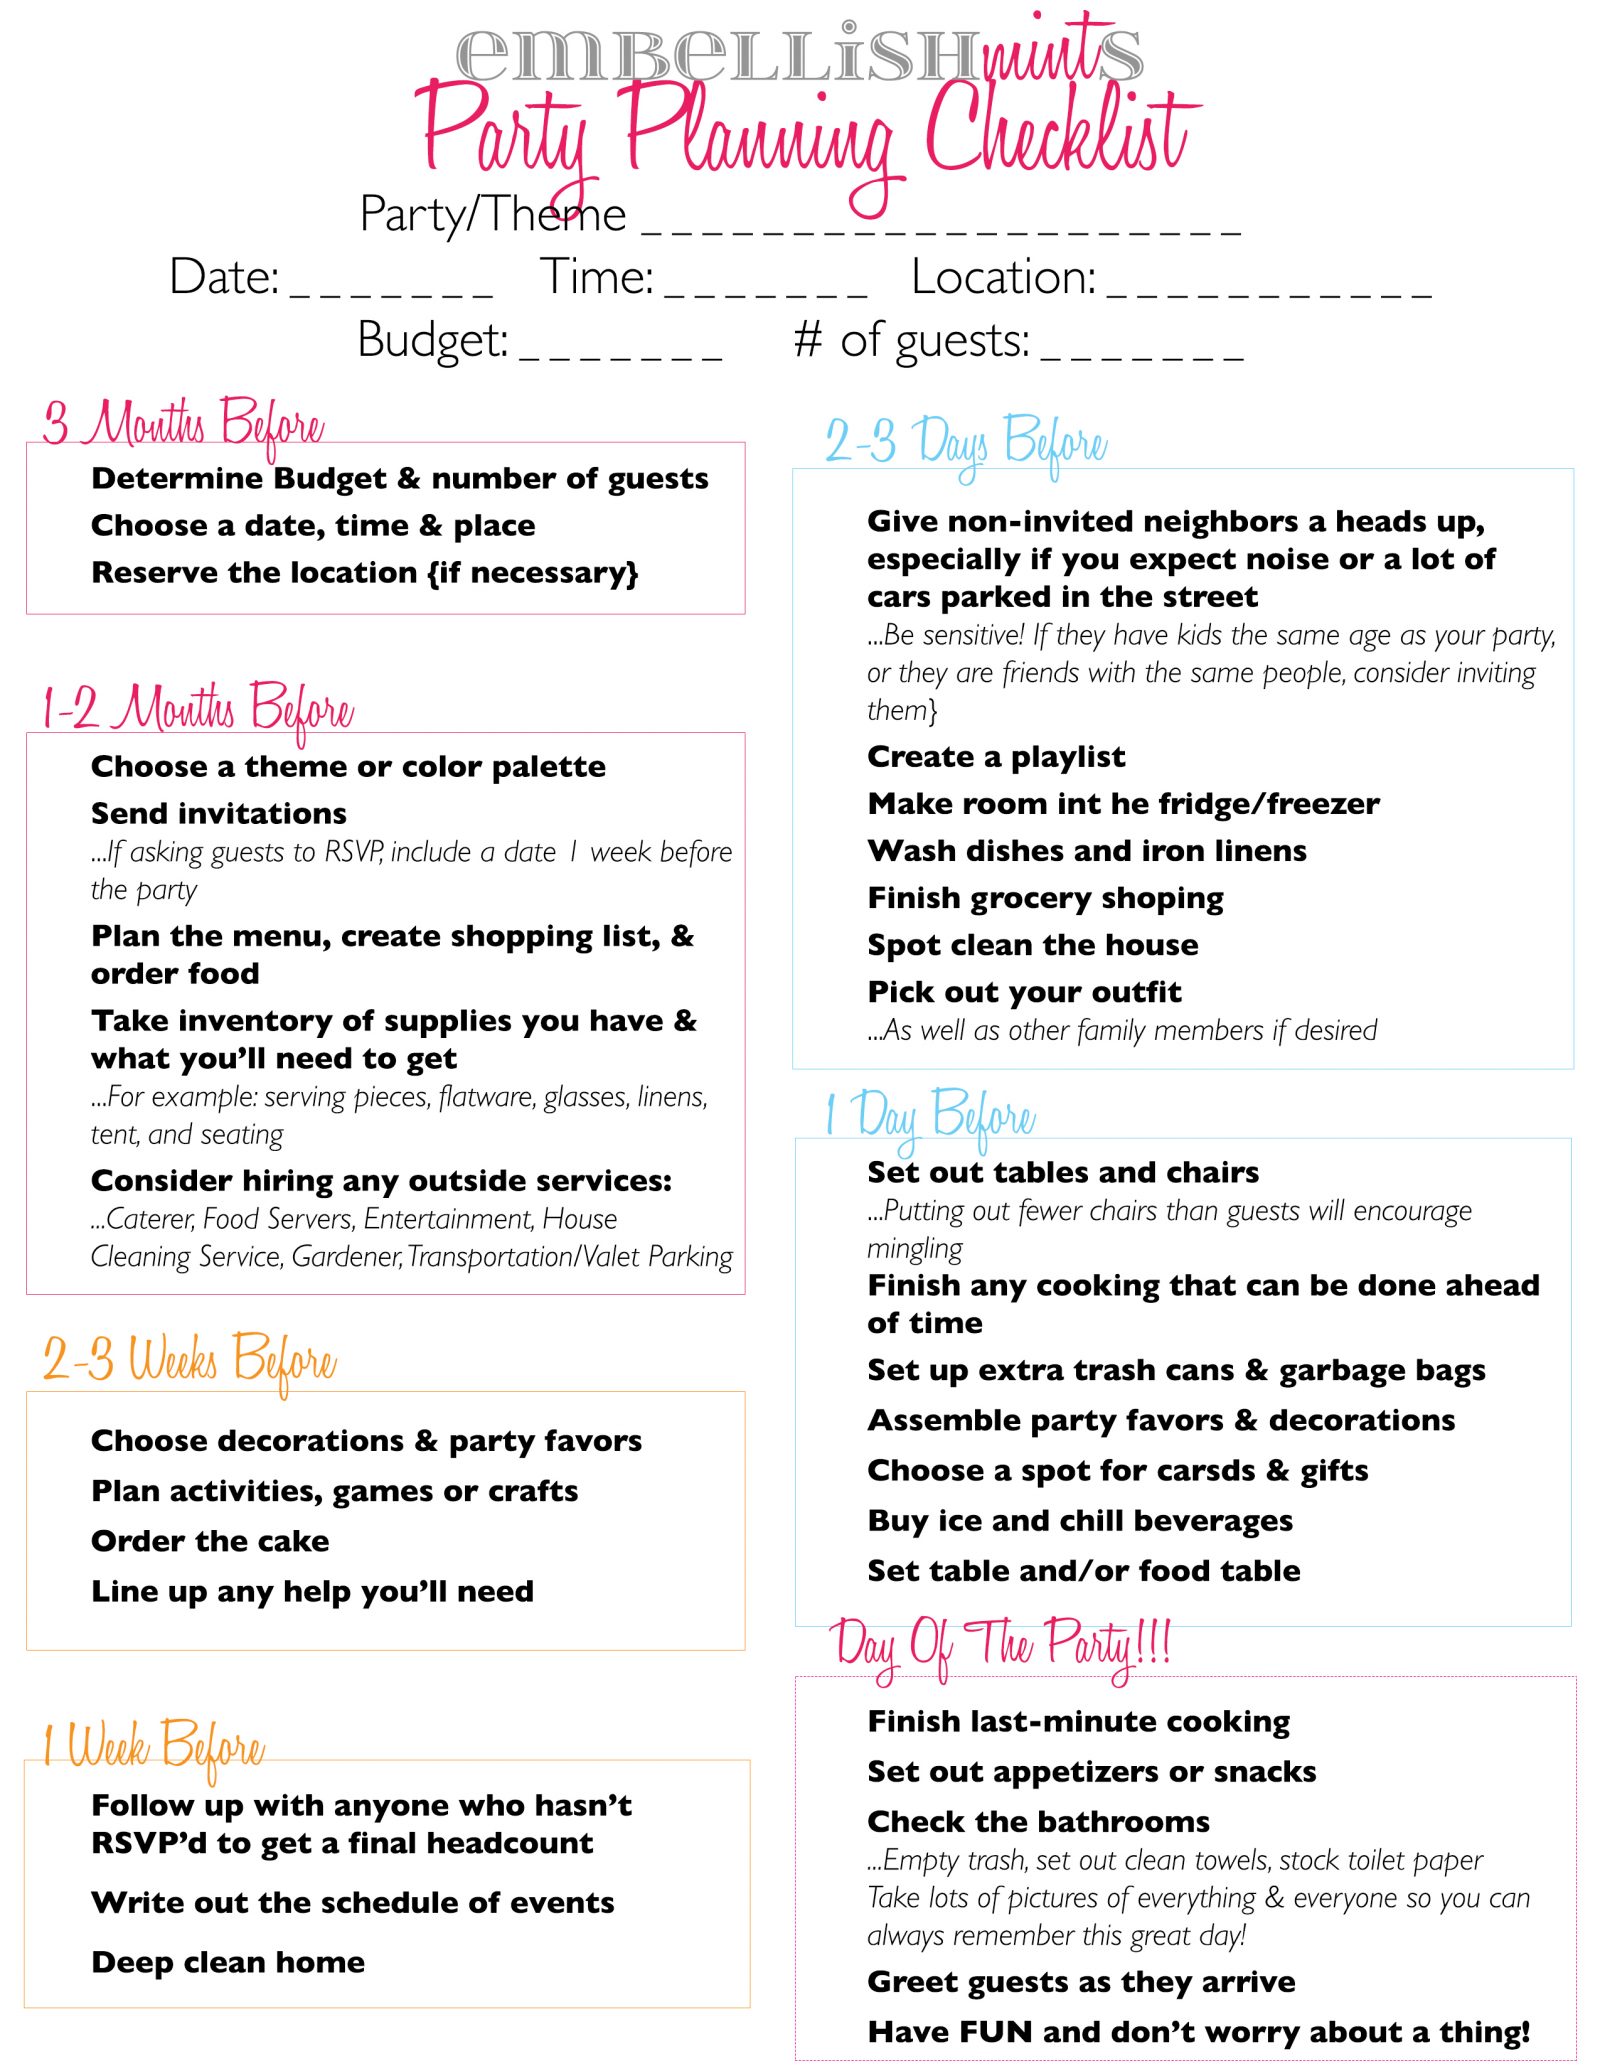 Protected: Event Planning Timeline Checklist